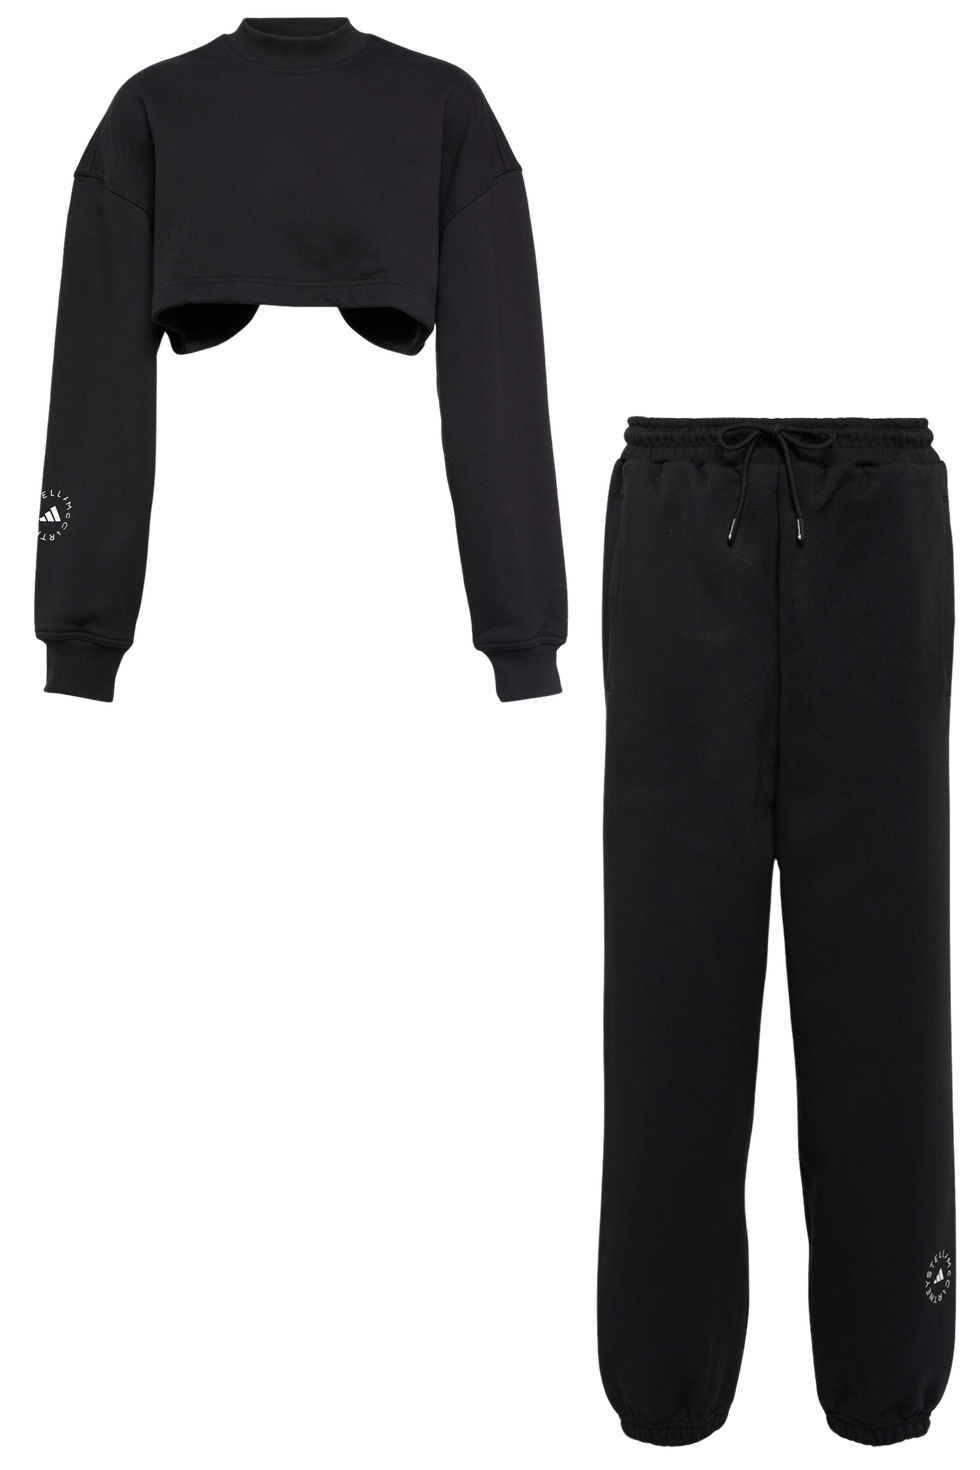 Women's Tracksuits, Tracksuit Sets For Women